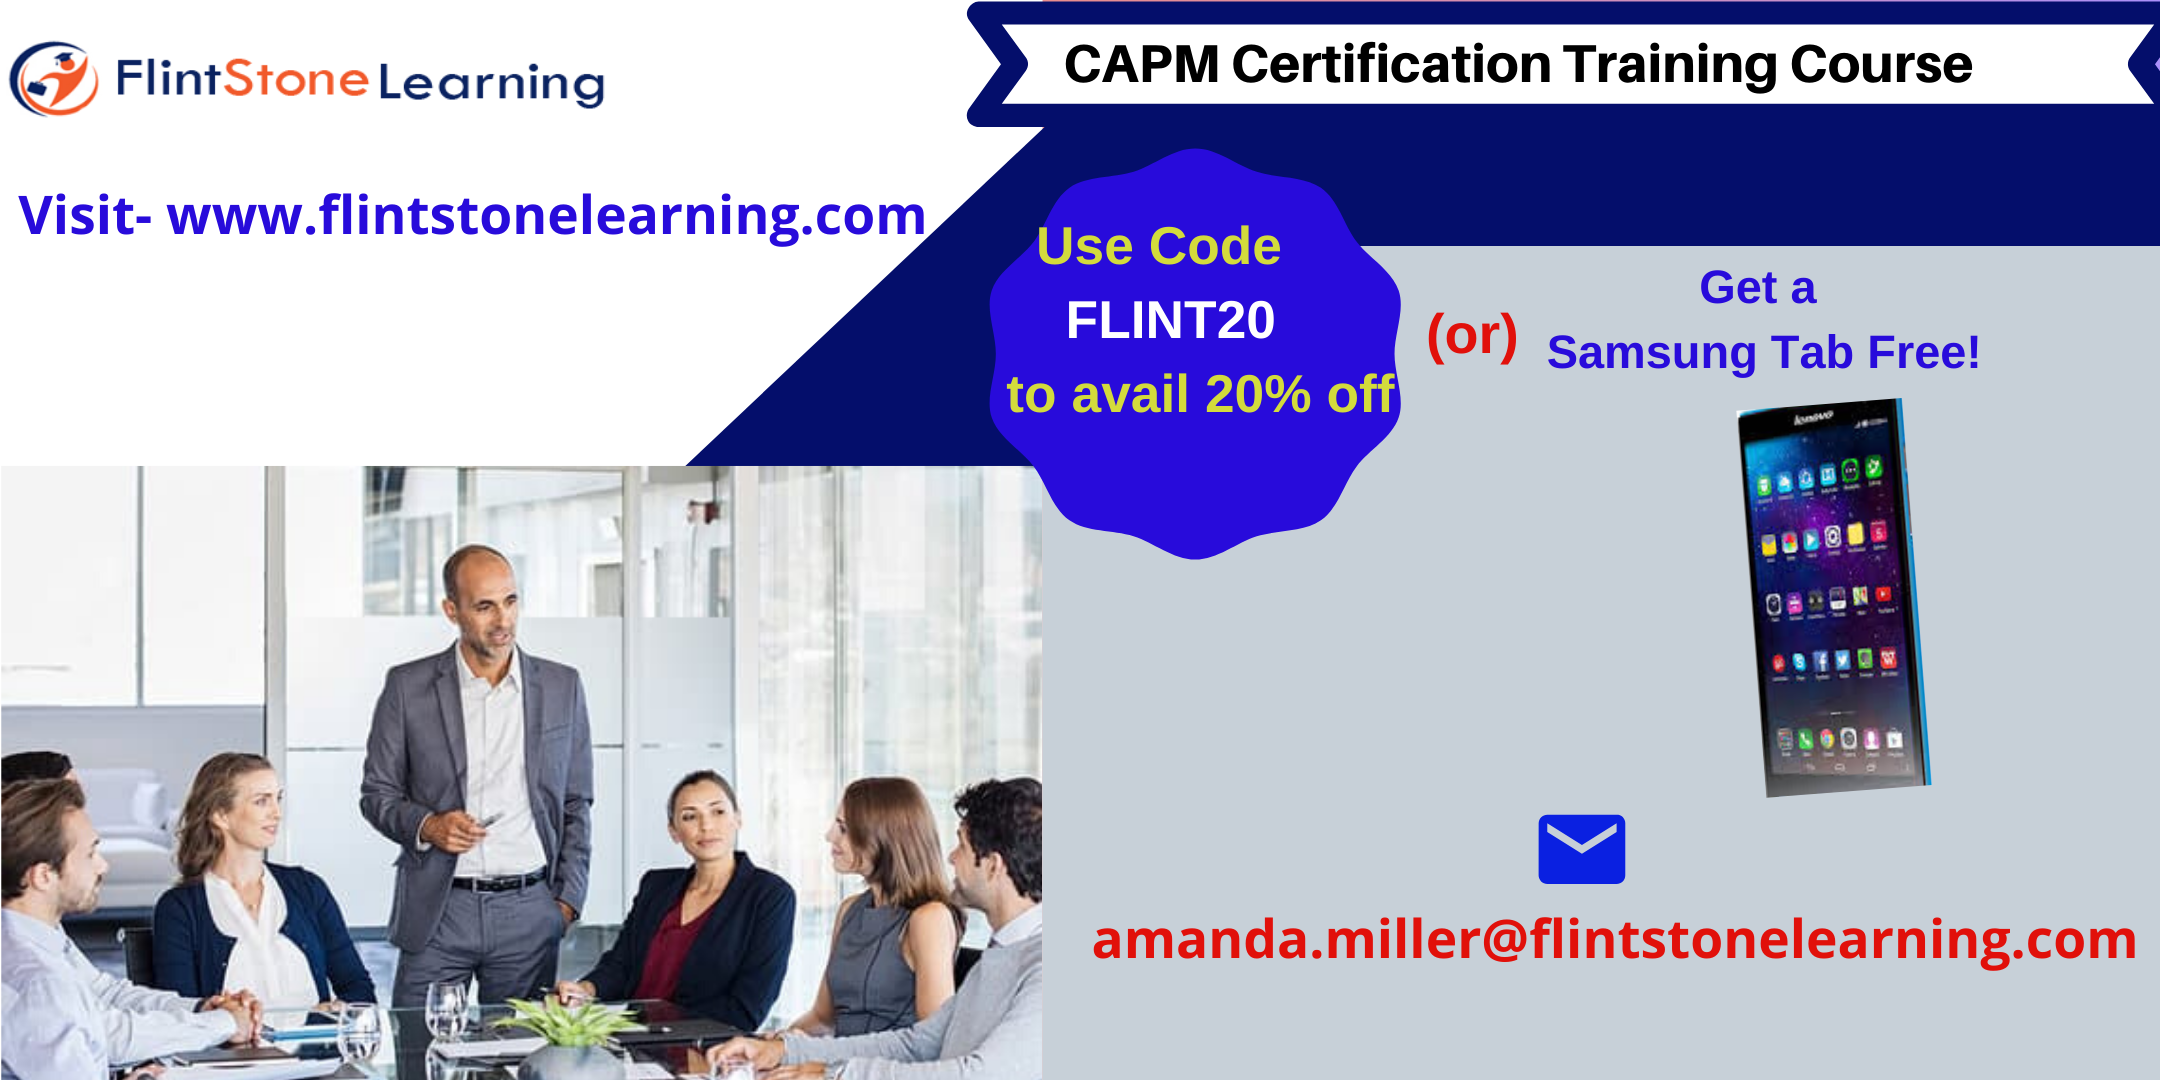 CAPM Certification Training Course in Rosamond, CA